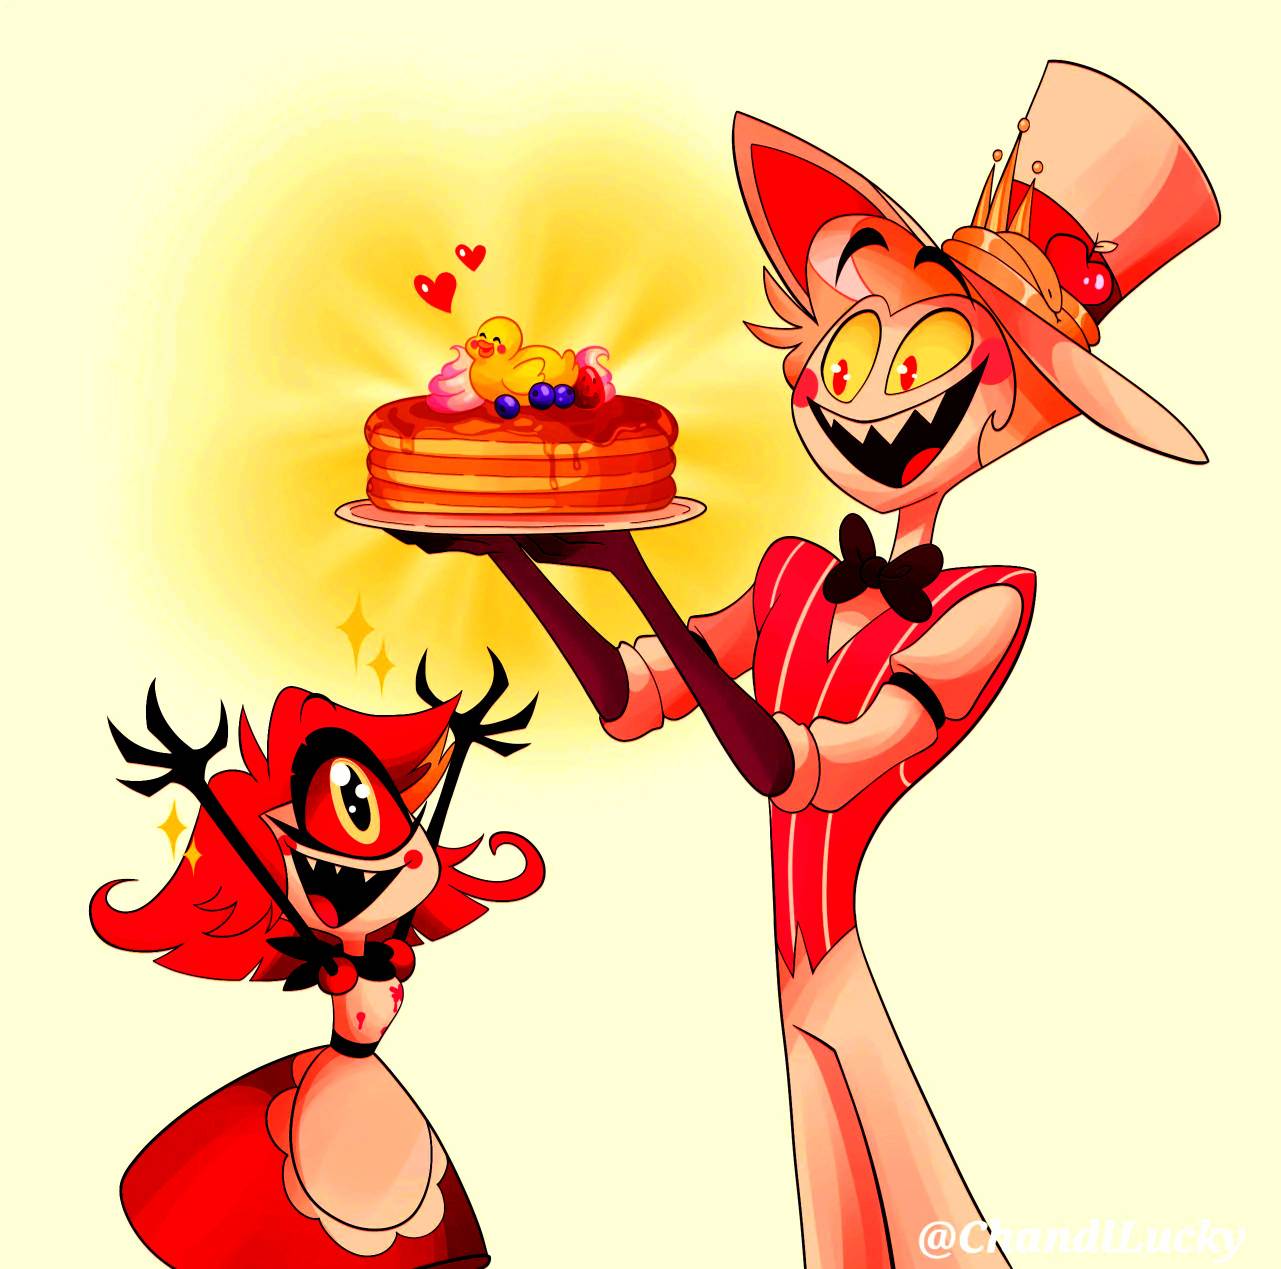 Lucifer makes Nifty Pancakes by mac876 on DeviantArt